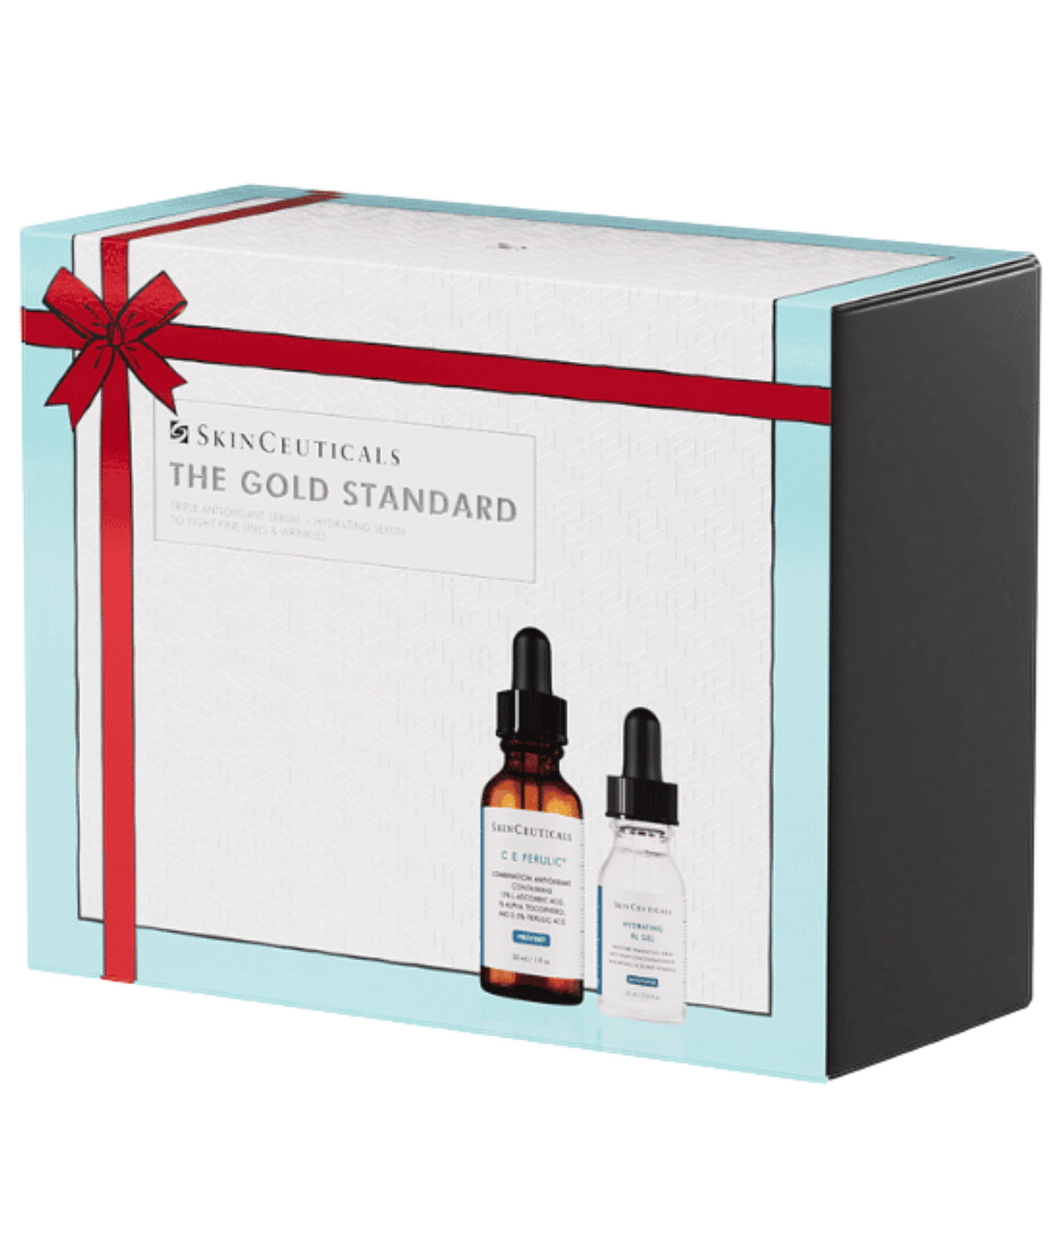 Skinceuticals The Gold Standard Holiday Set